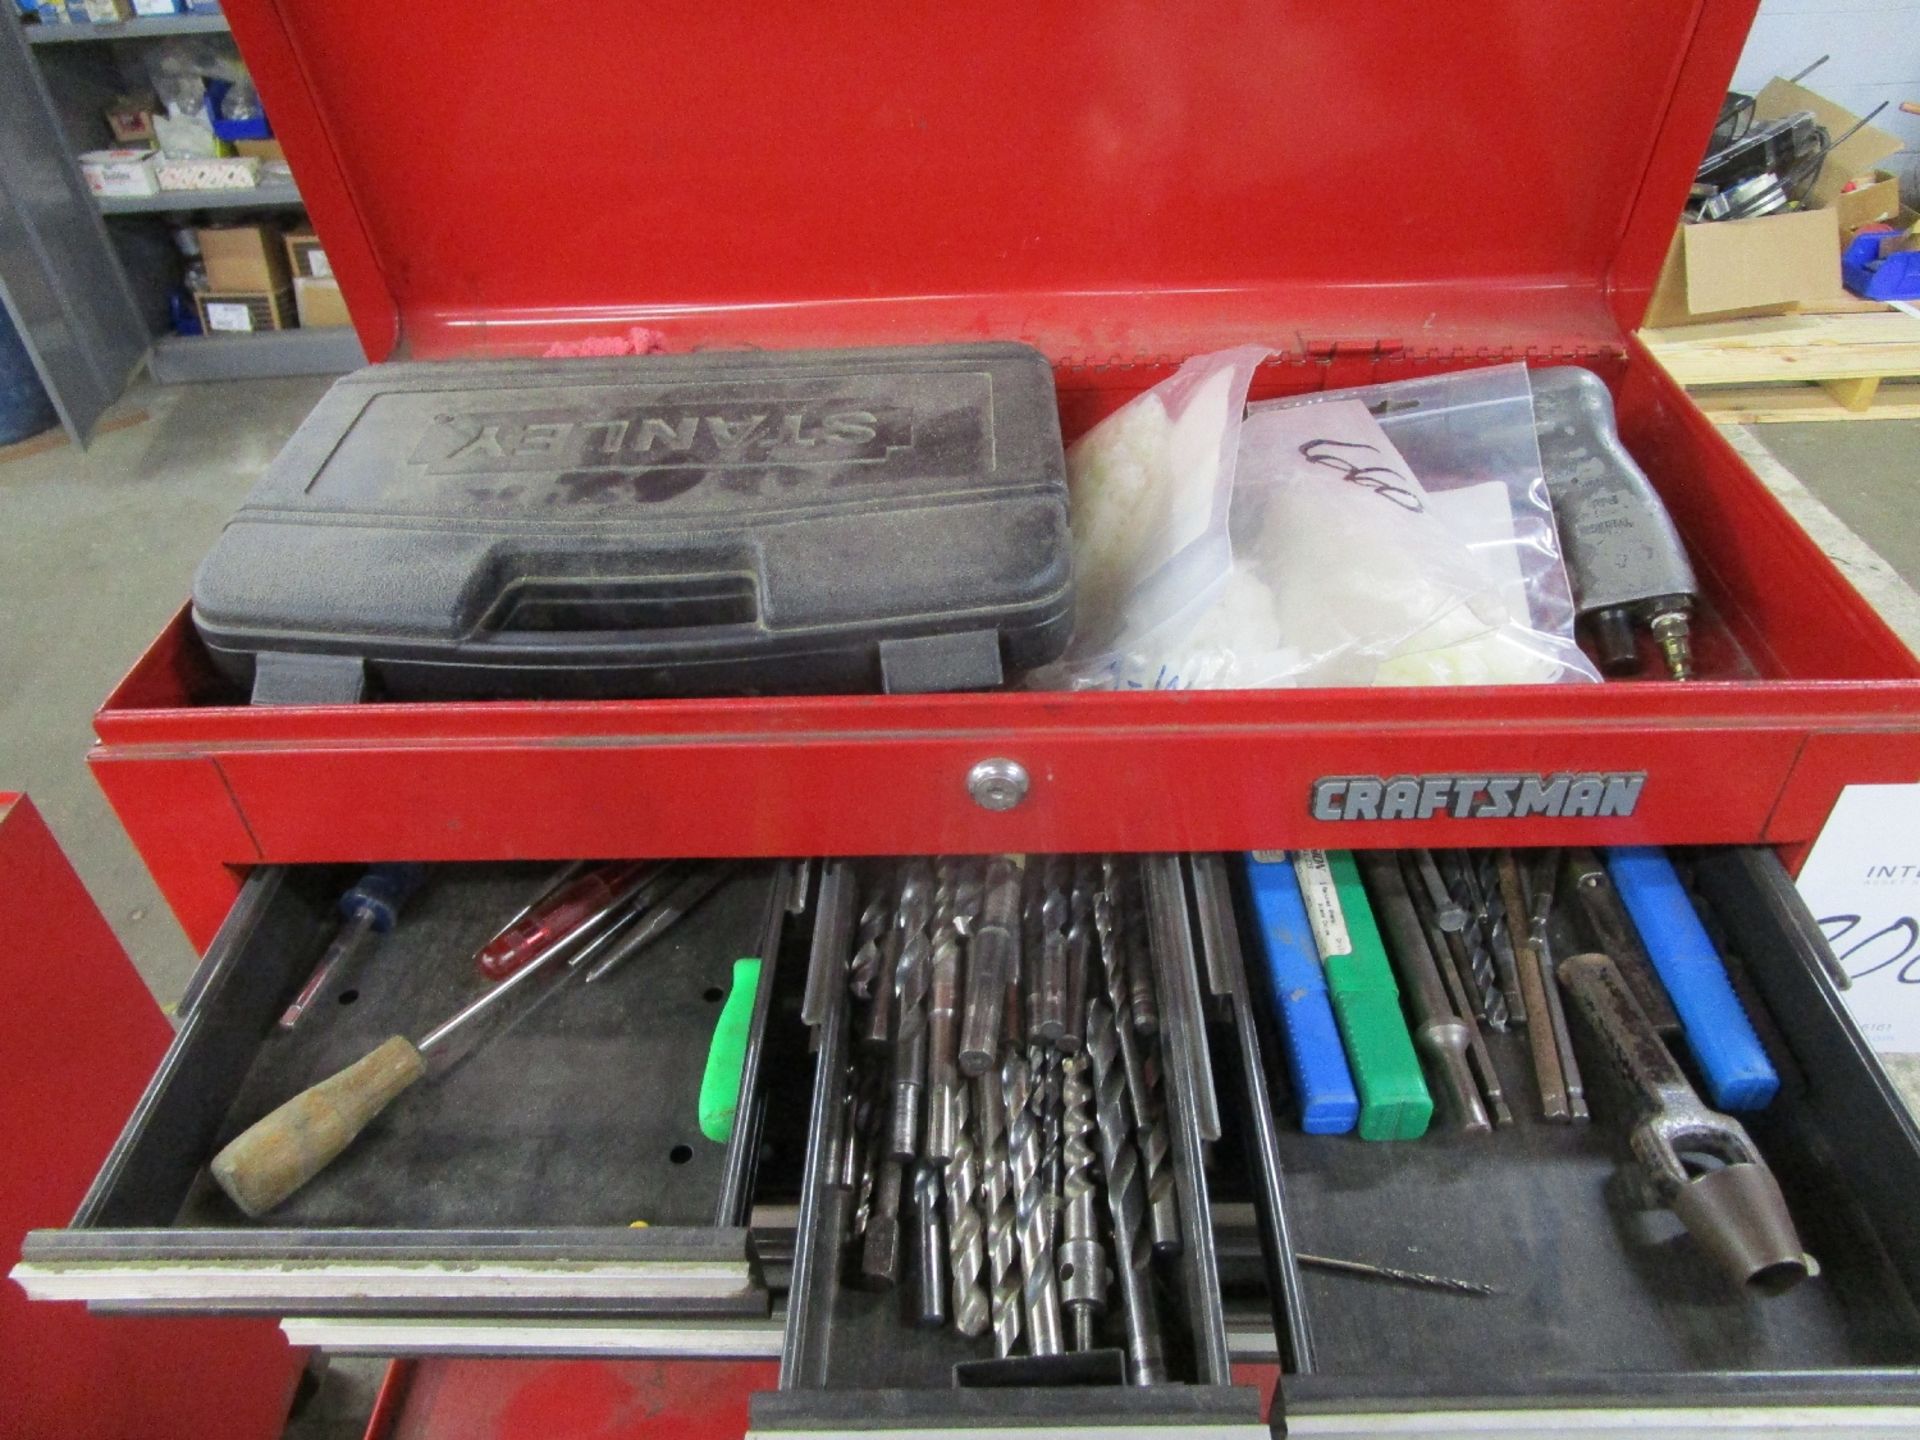 Kennedy & Craftsman Tool Chests with Contents - Image 2 of 2